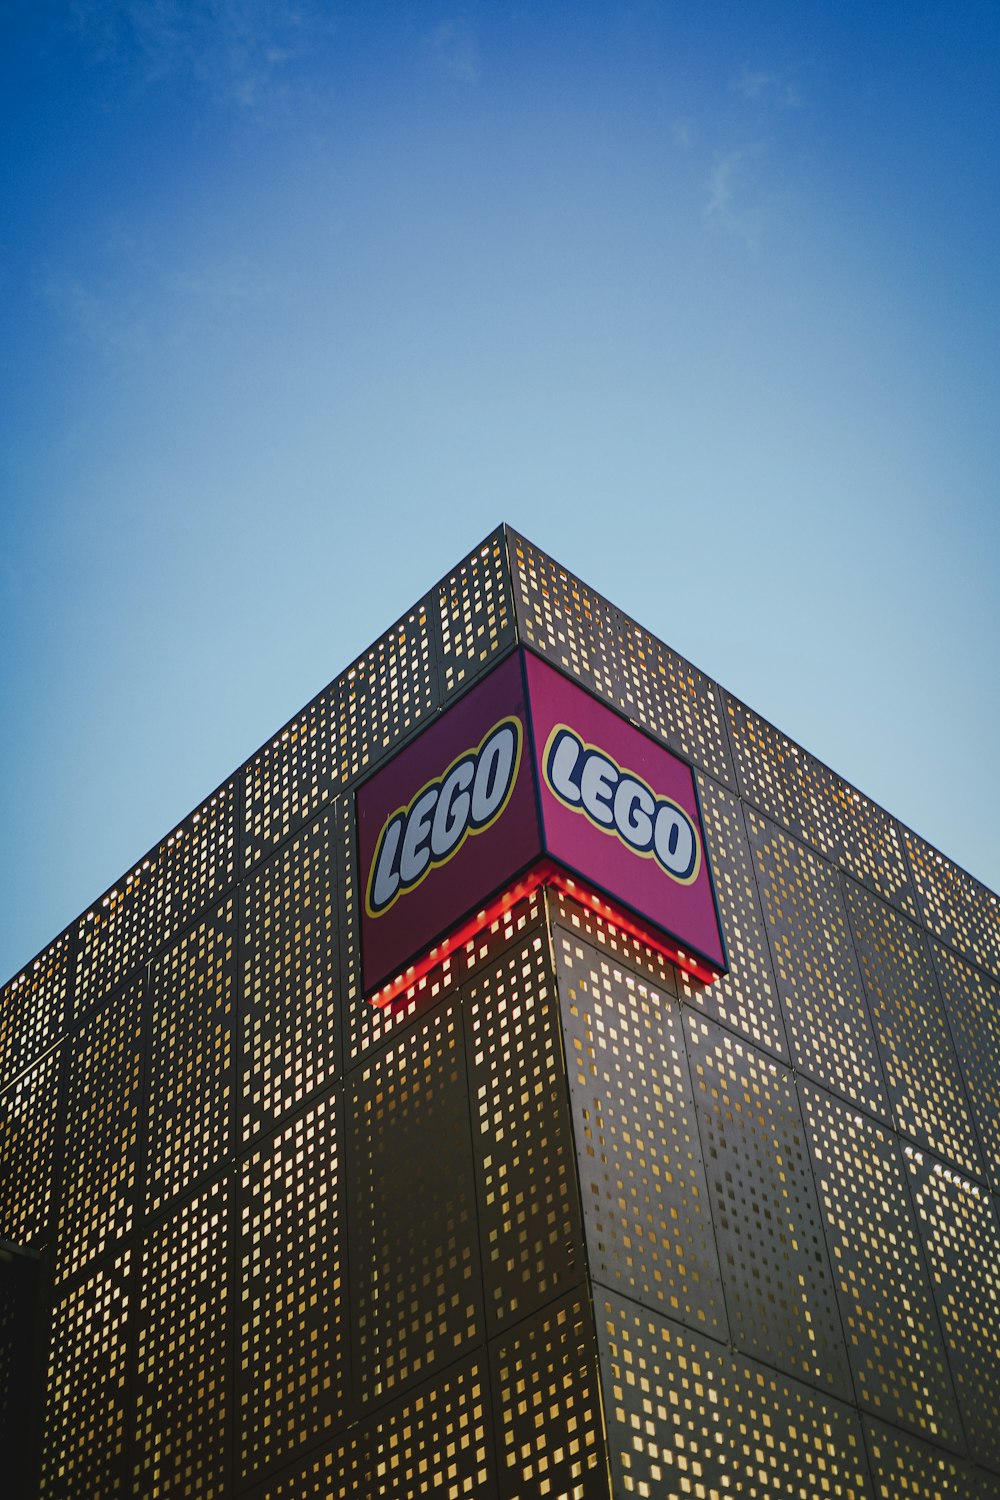 a building with a sign that says lego on it